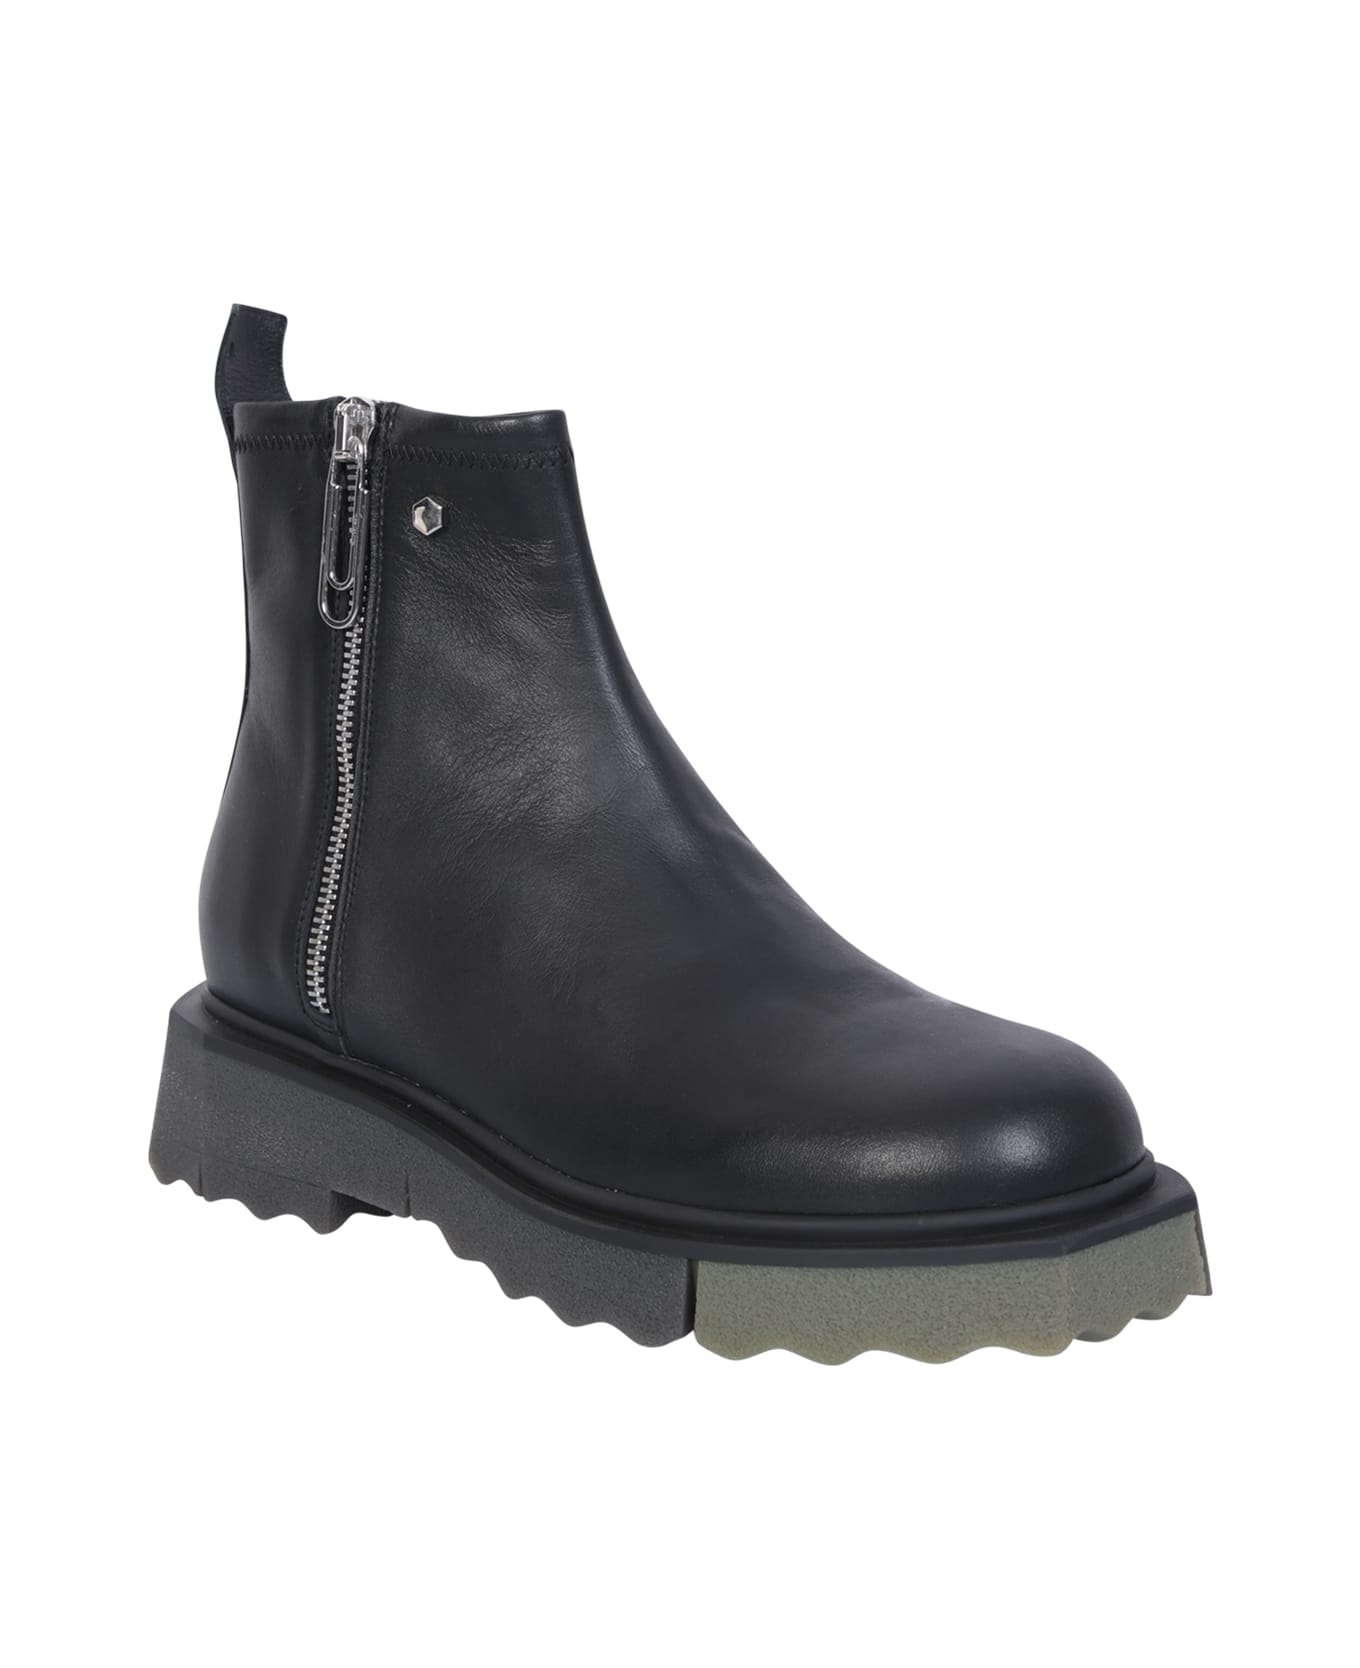 Off-White Leather Boots - Black